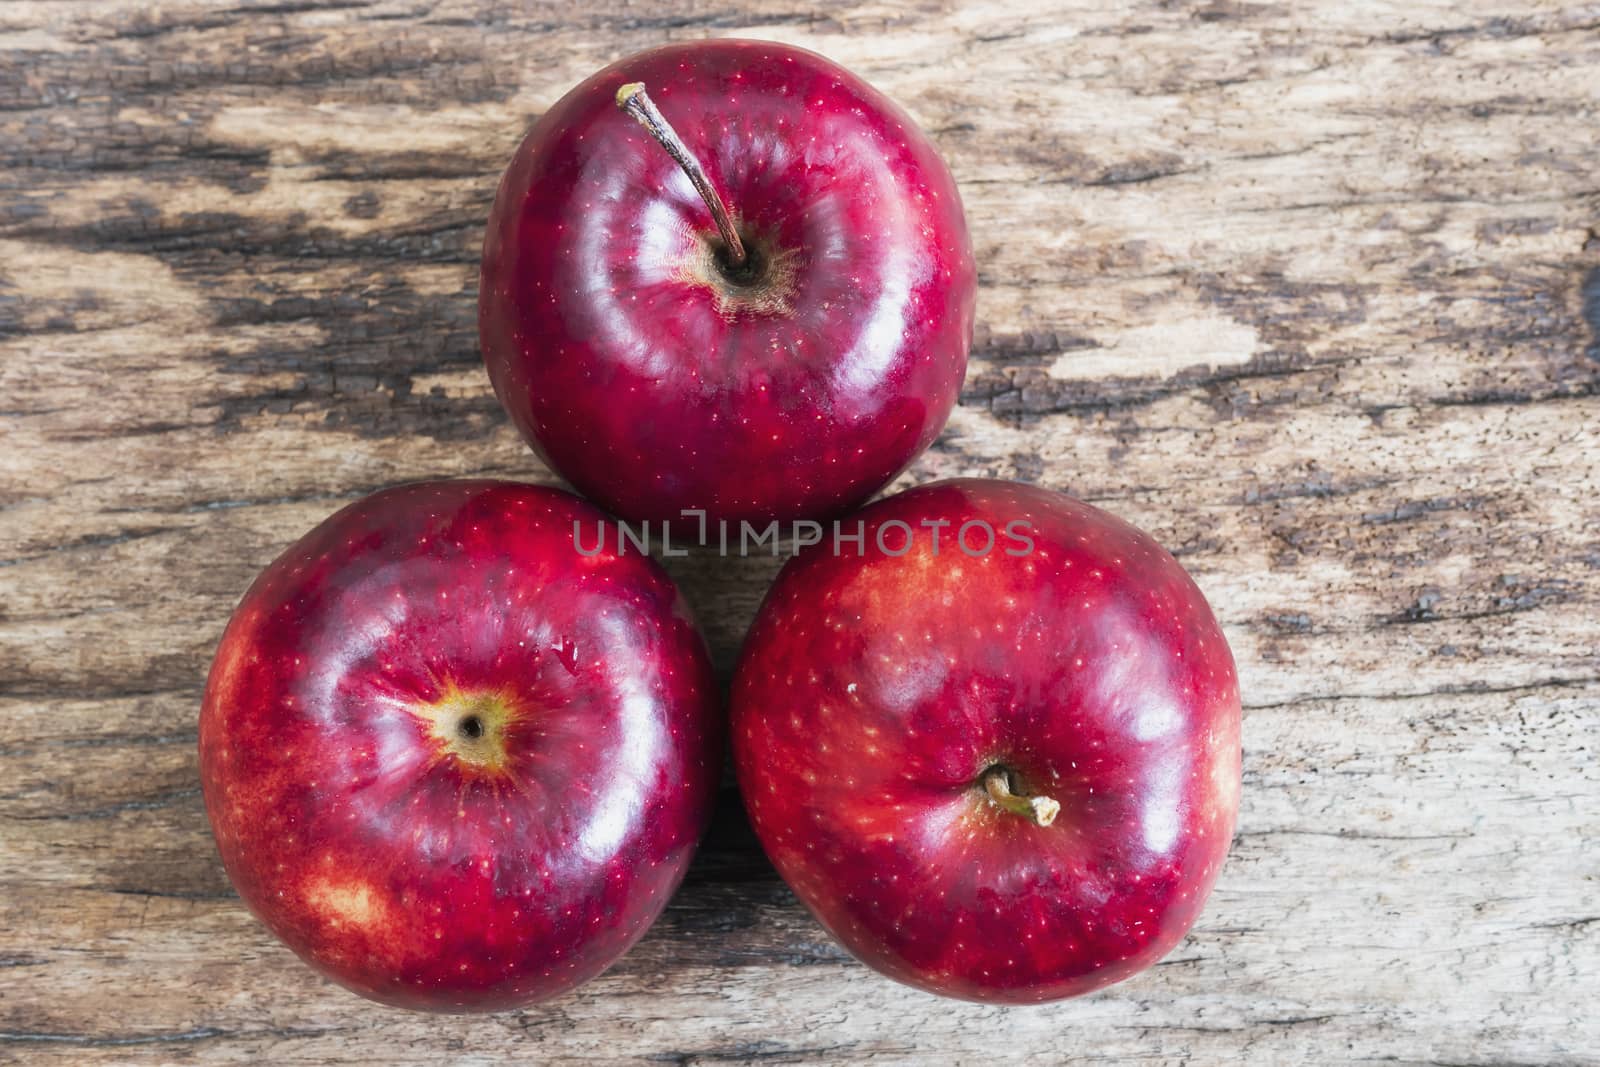 Fresh red apple over old wooden texture background - fresh fruit background concept